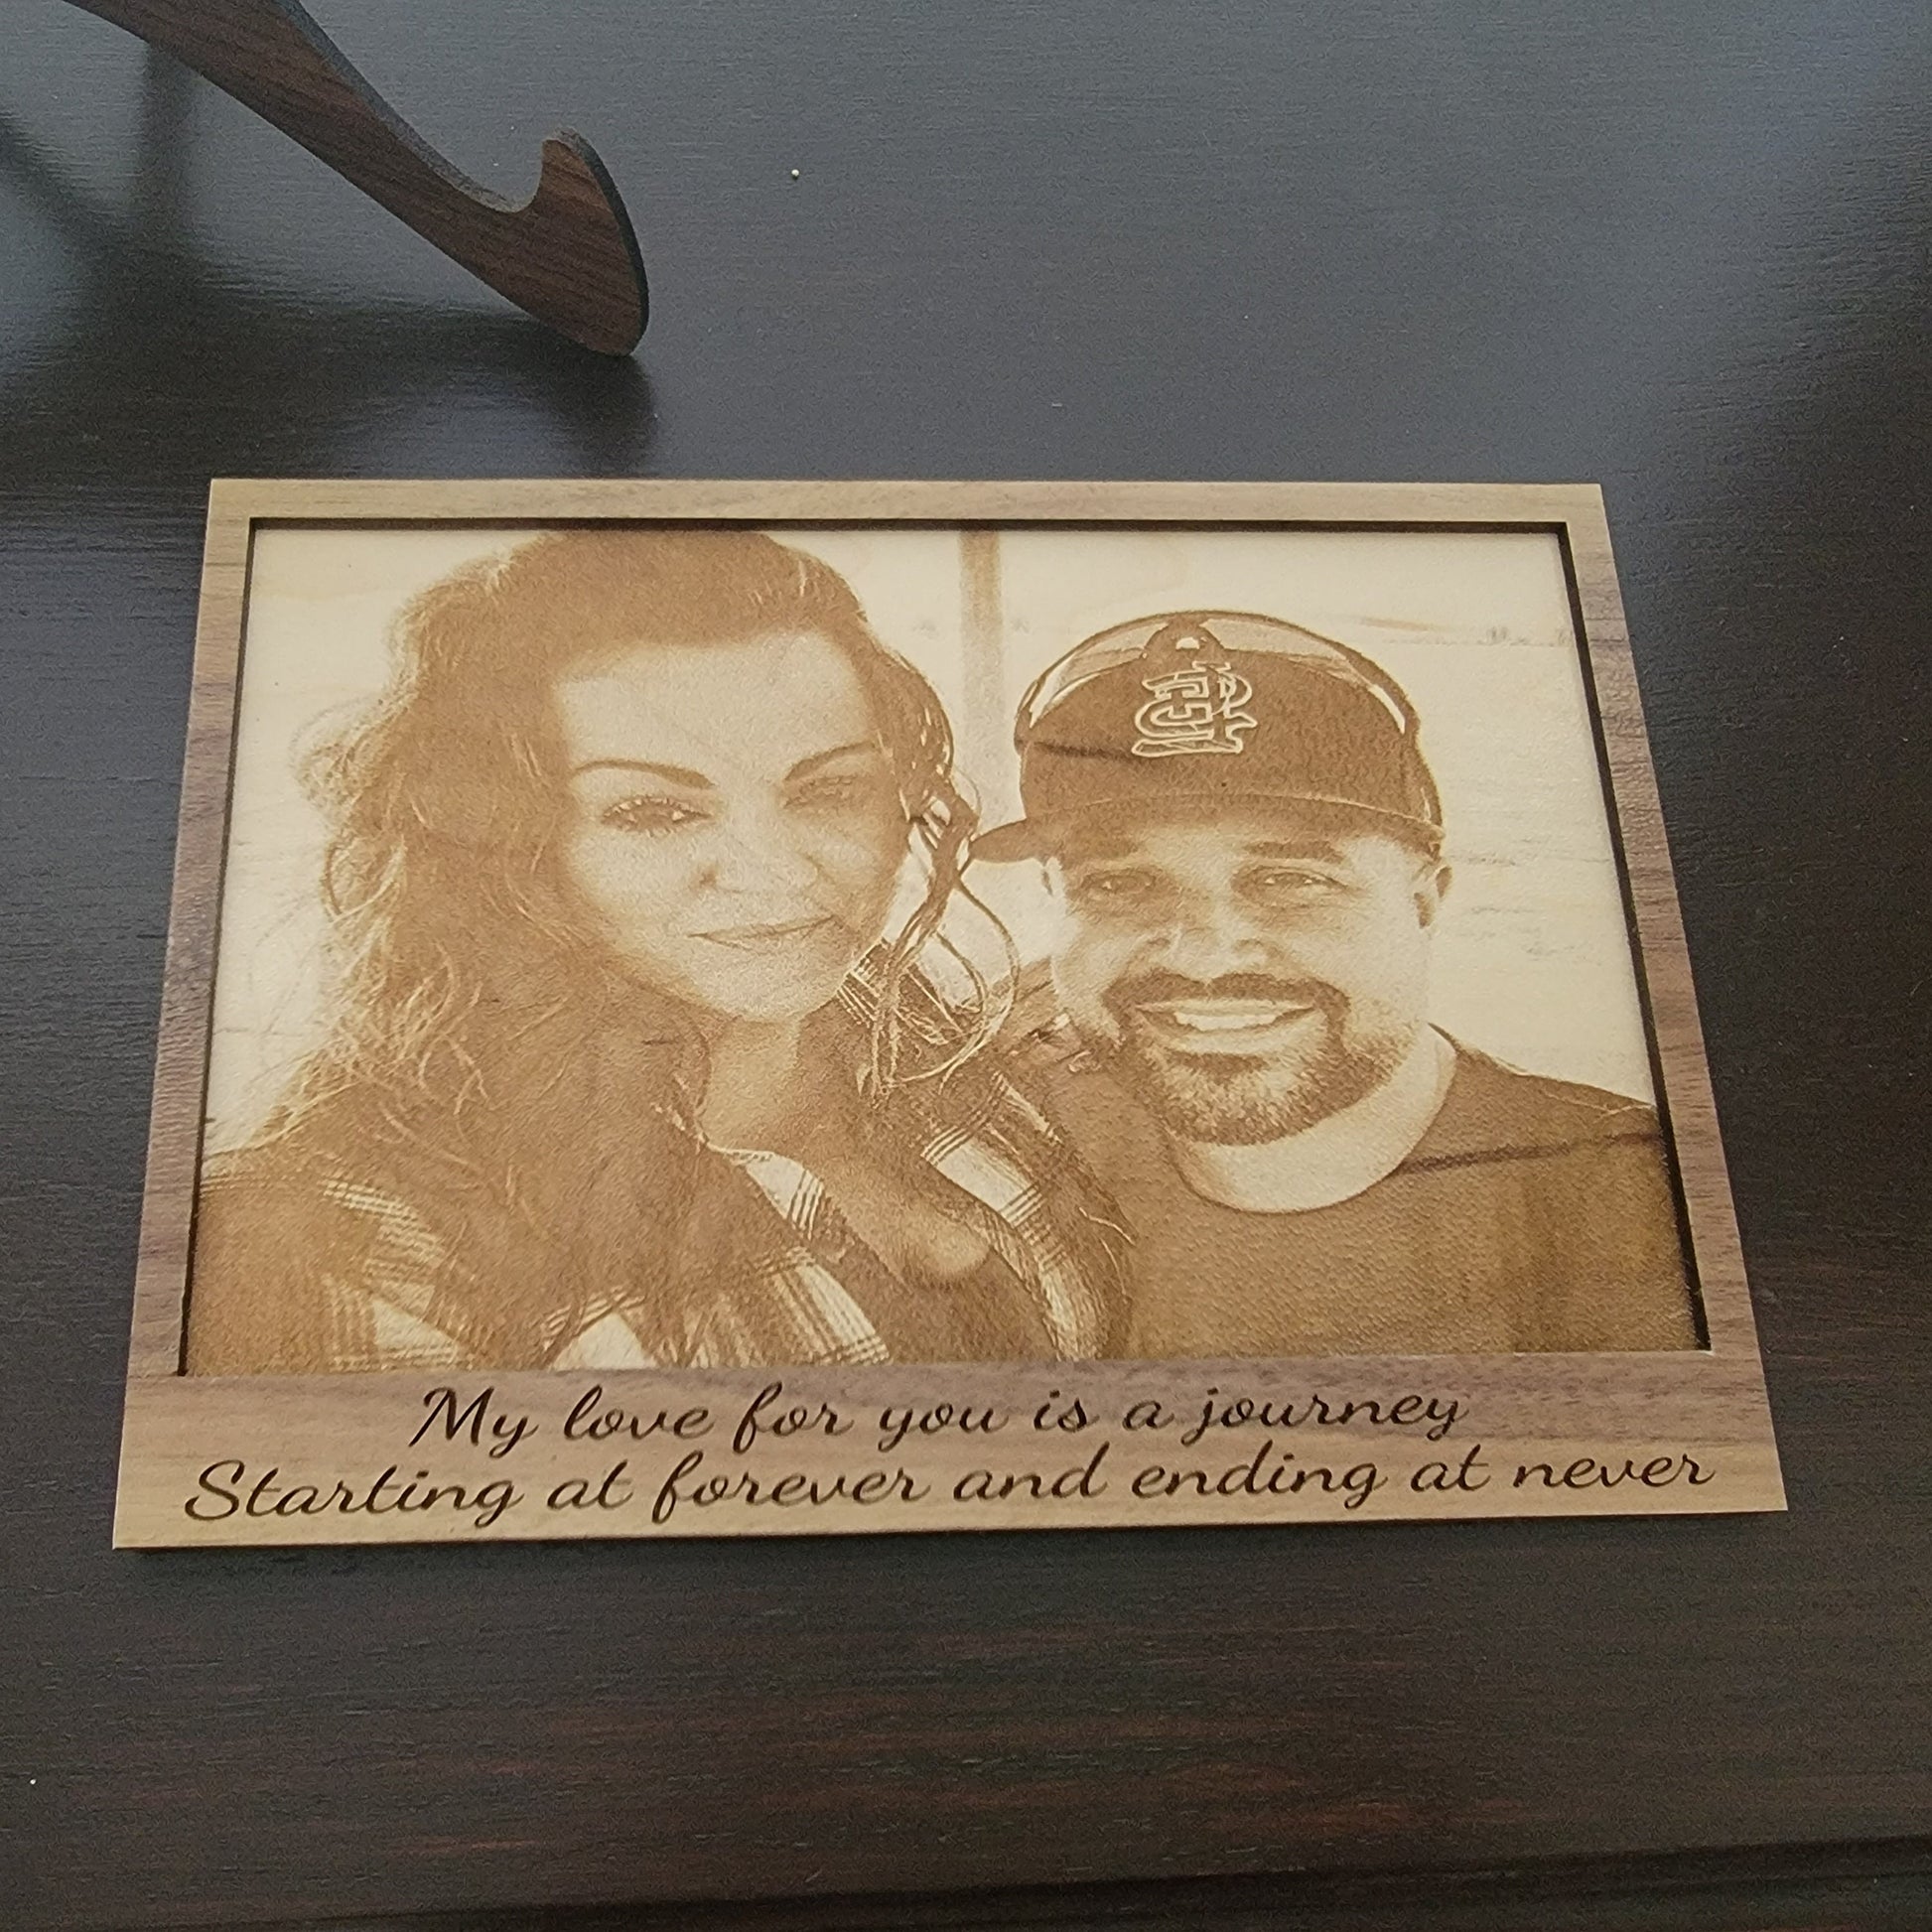 Engraved Wood Photo, custom wood photo, wood portrait, personalized gift, family pets graduation Choose from 2 layer or single layer